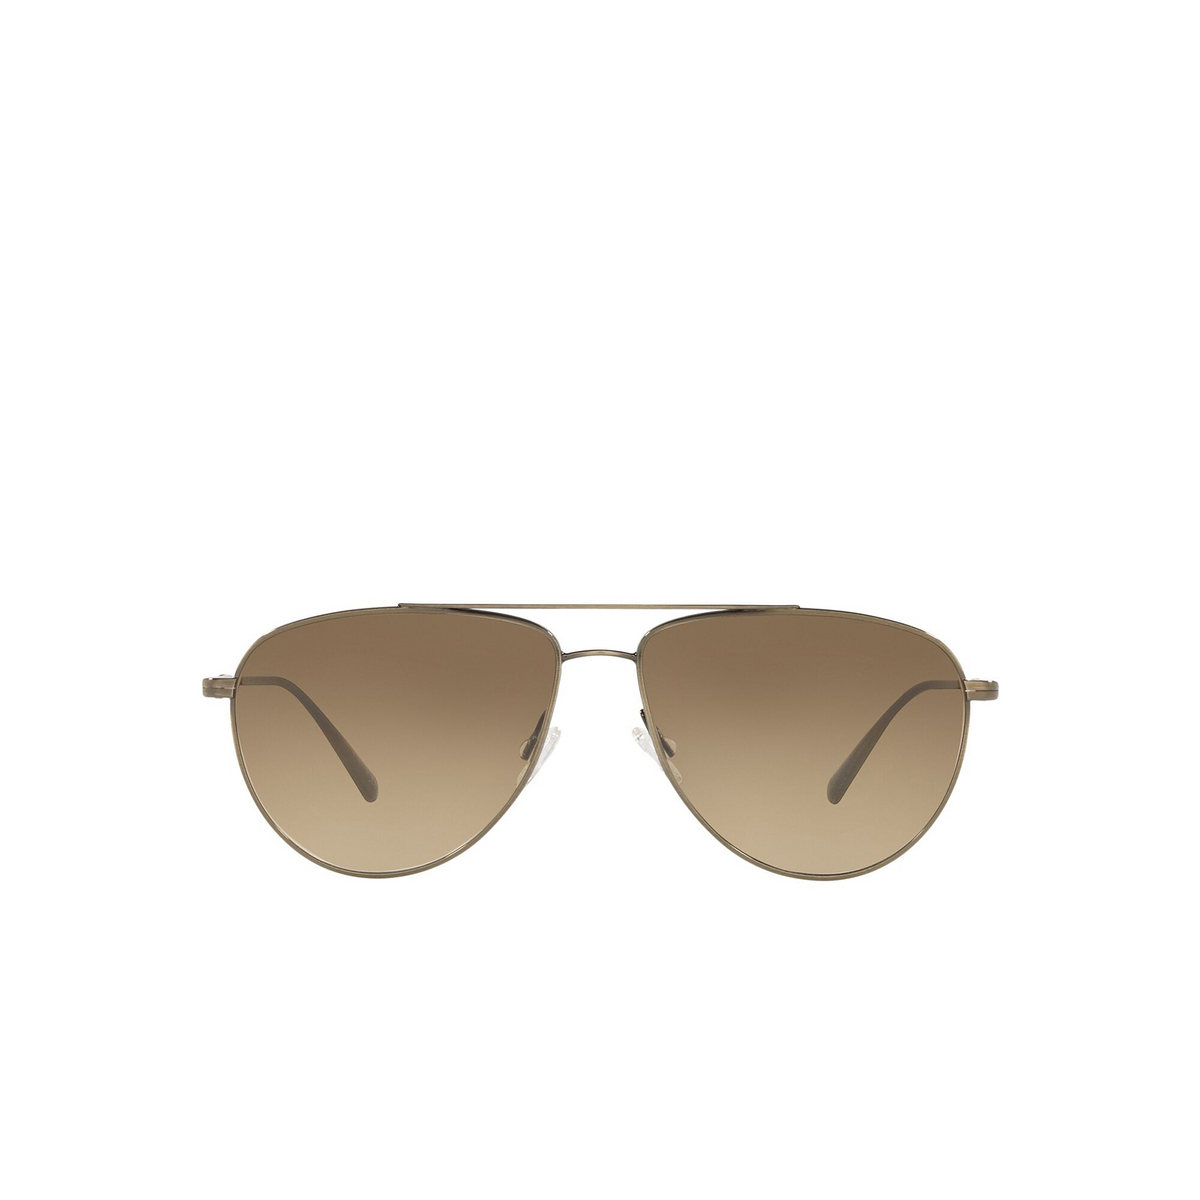 Oliver Peoples® Aviator Sunglasses: Disoriano OV1301S color Antique Gold 5284Q4 - front view.